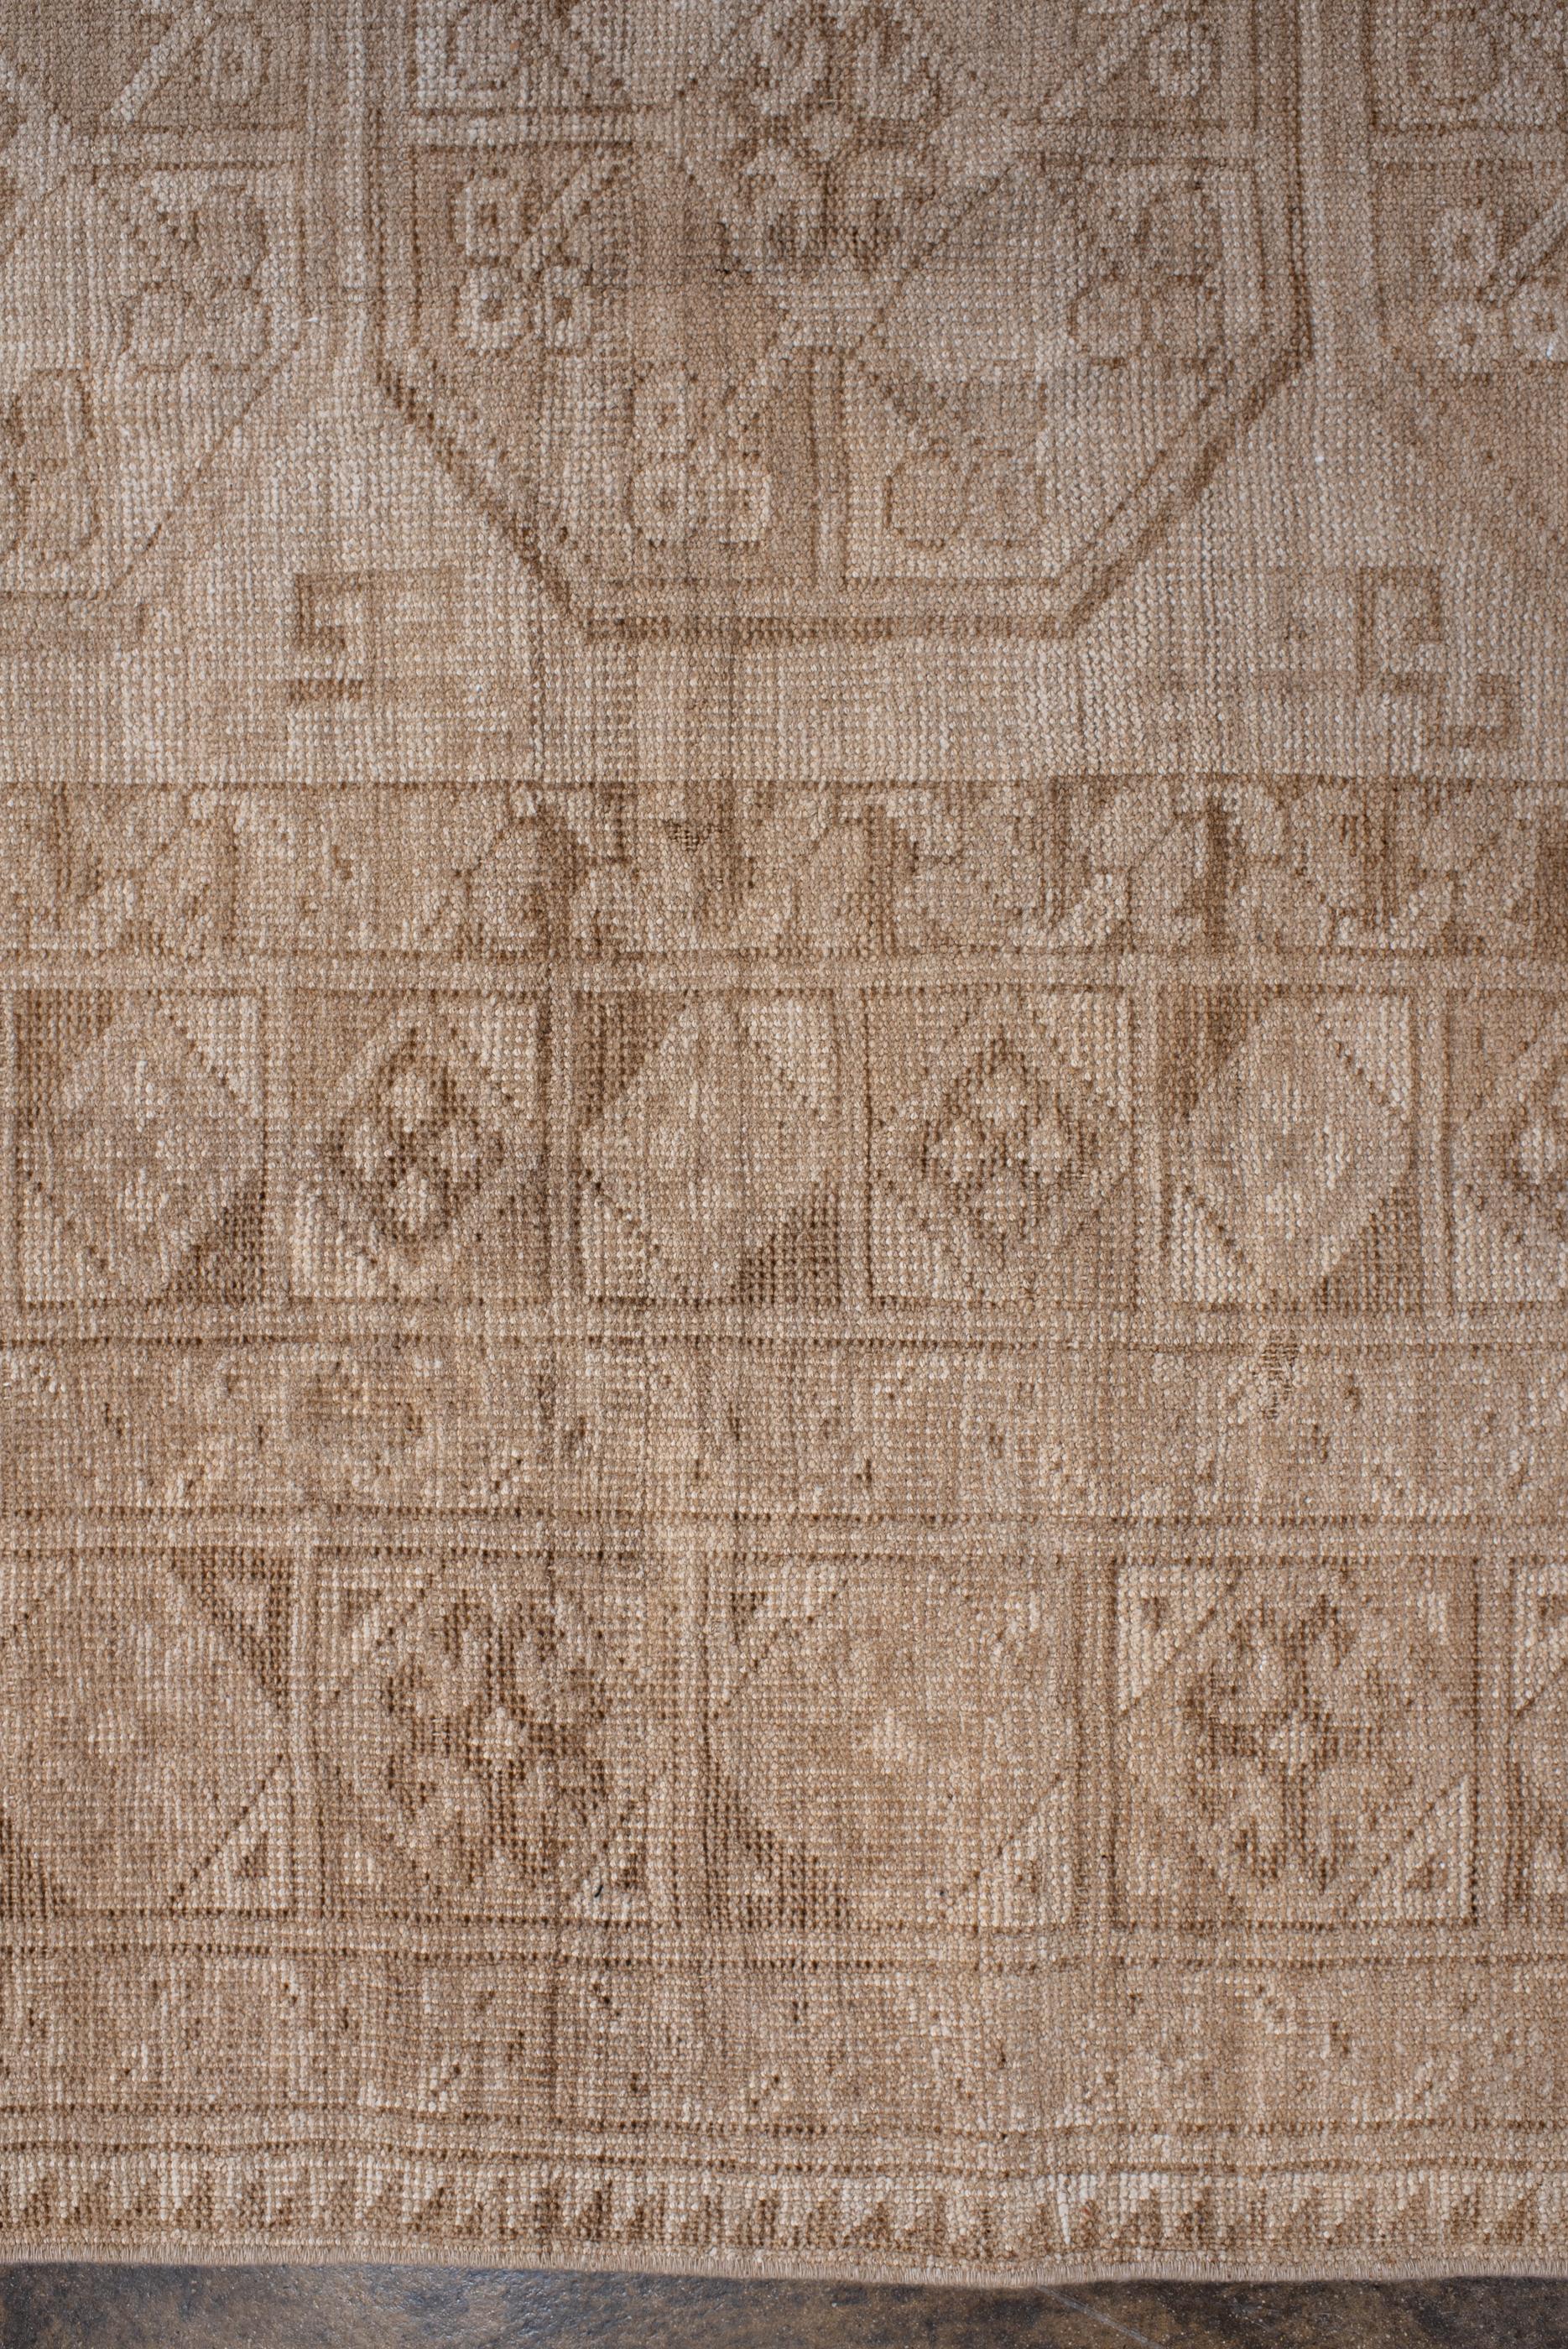 20th Century Light Colored Afghan Antique Rug